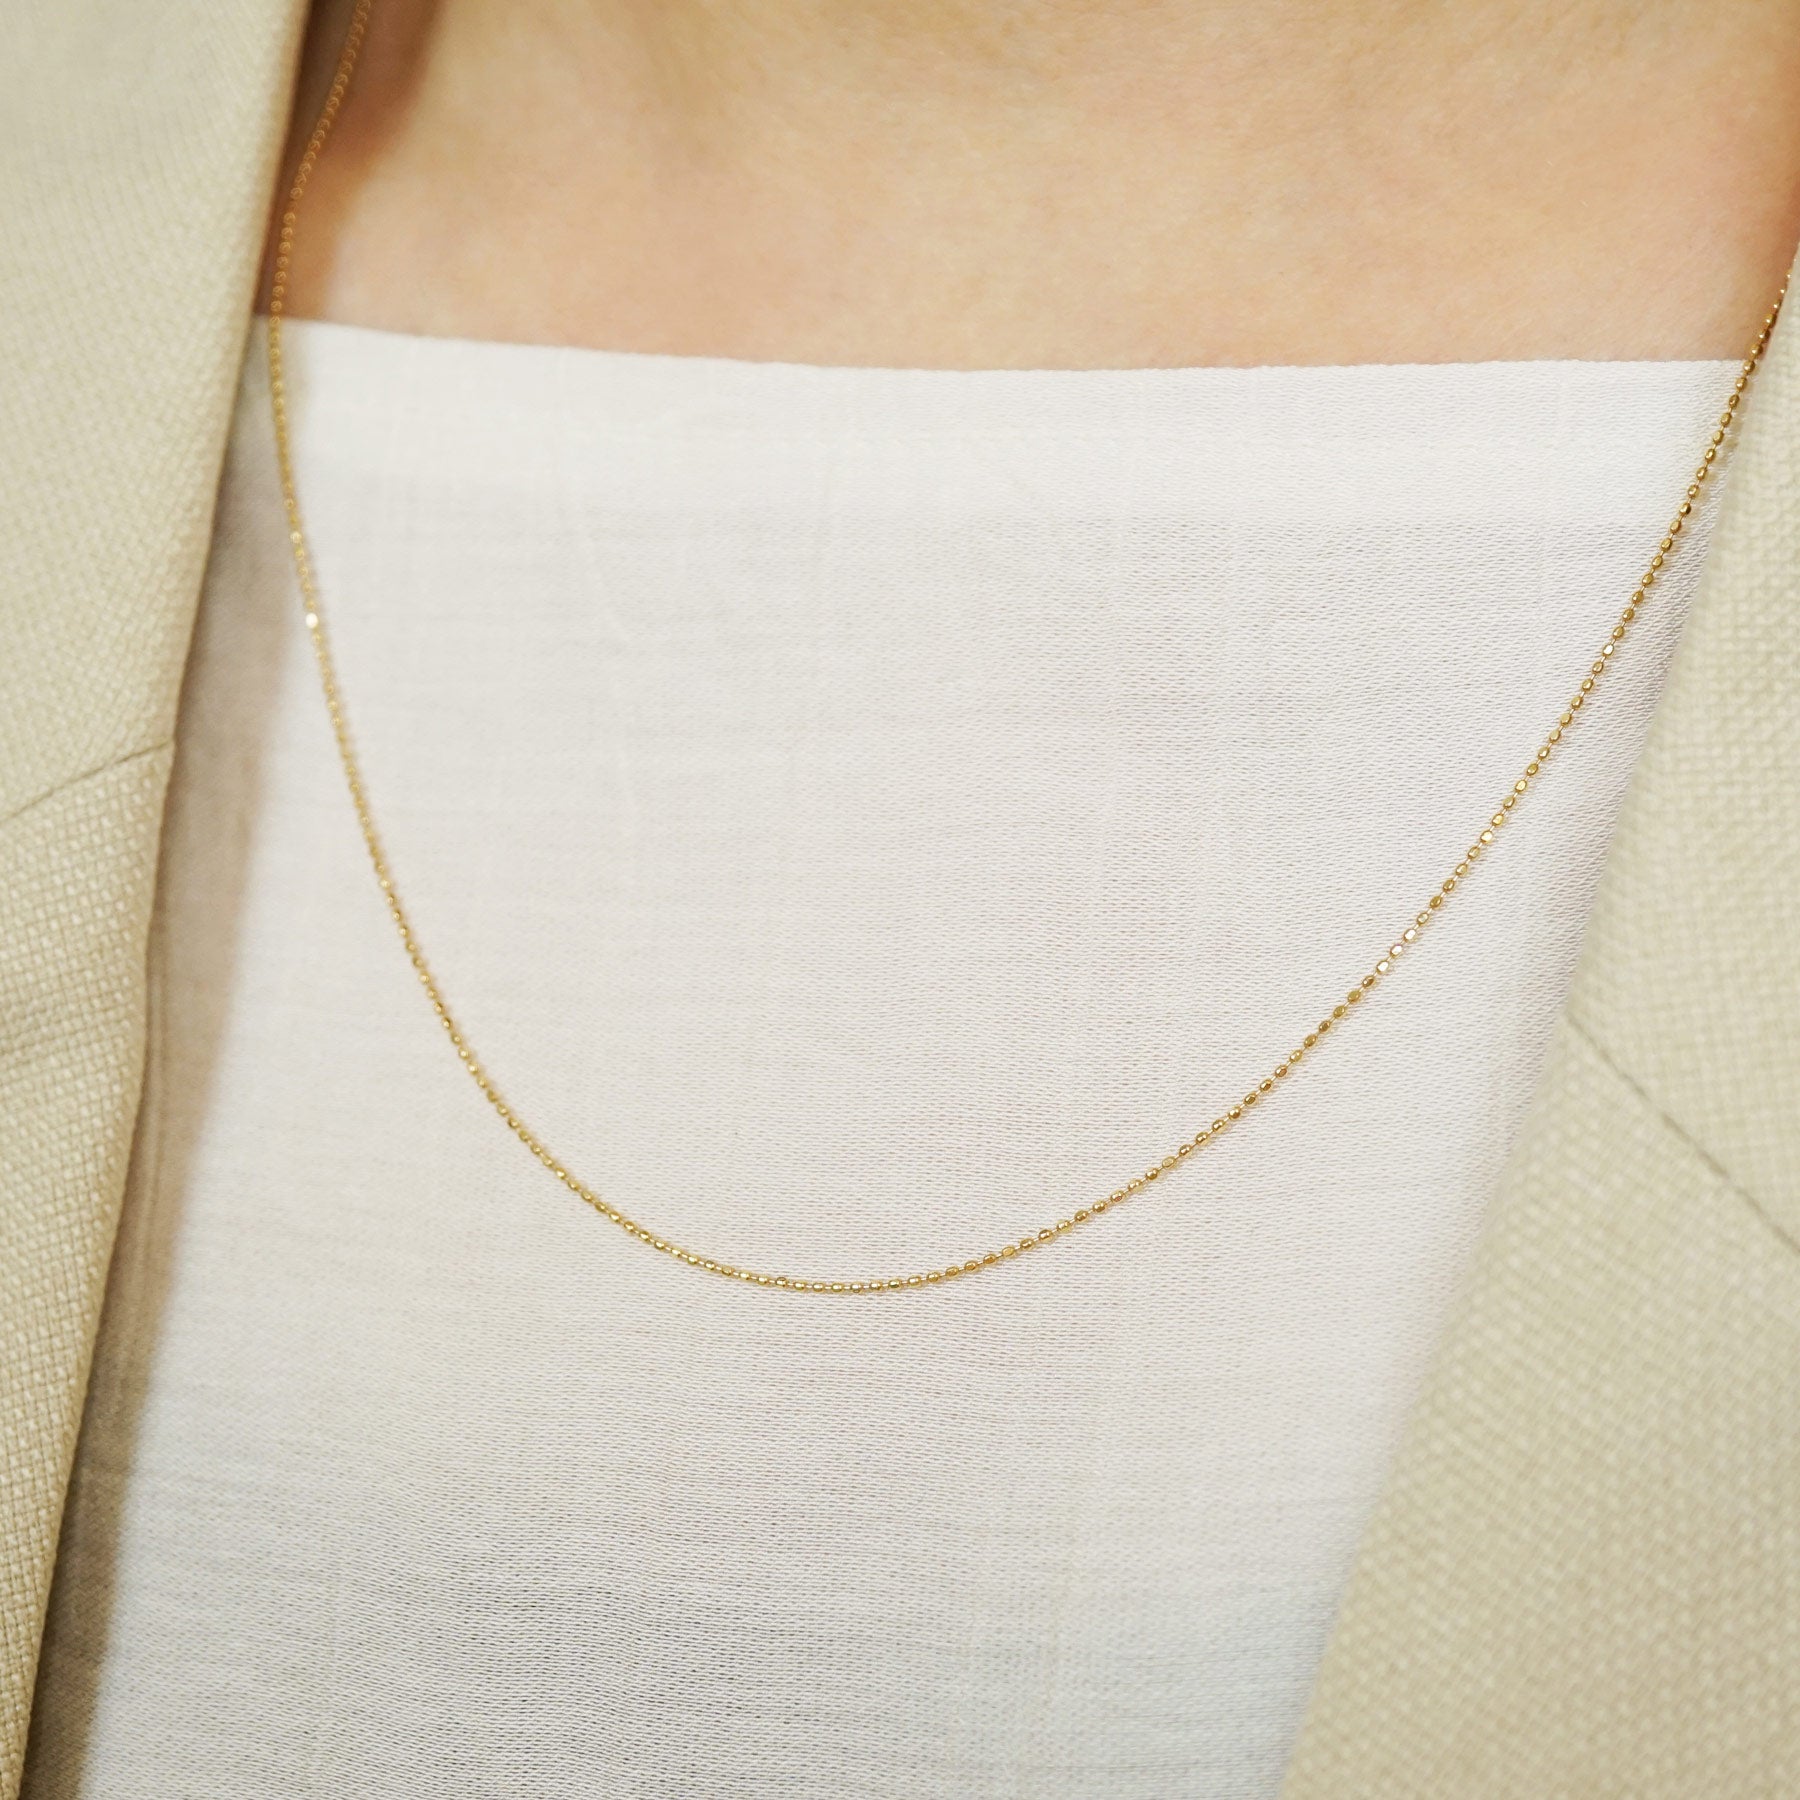 10K Cut Ball Chain Necklace 50cm (Yellow Gold) - Model Image